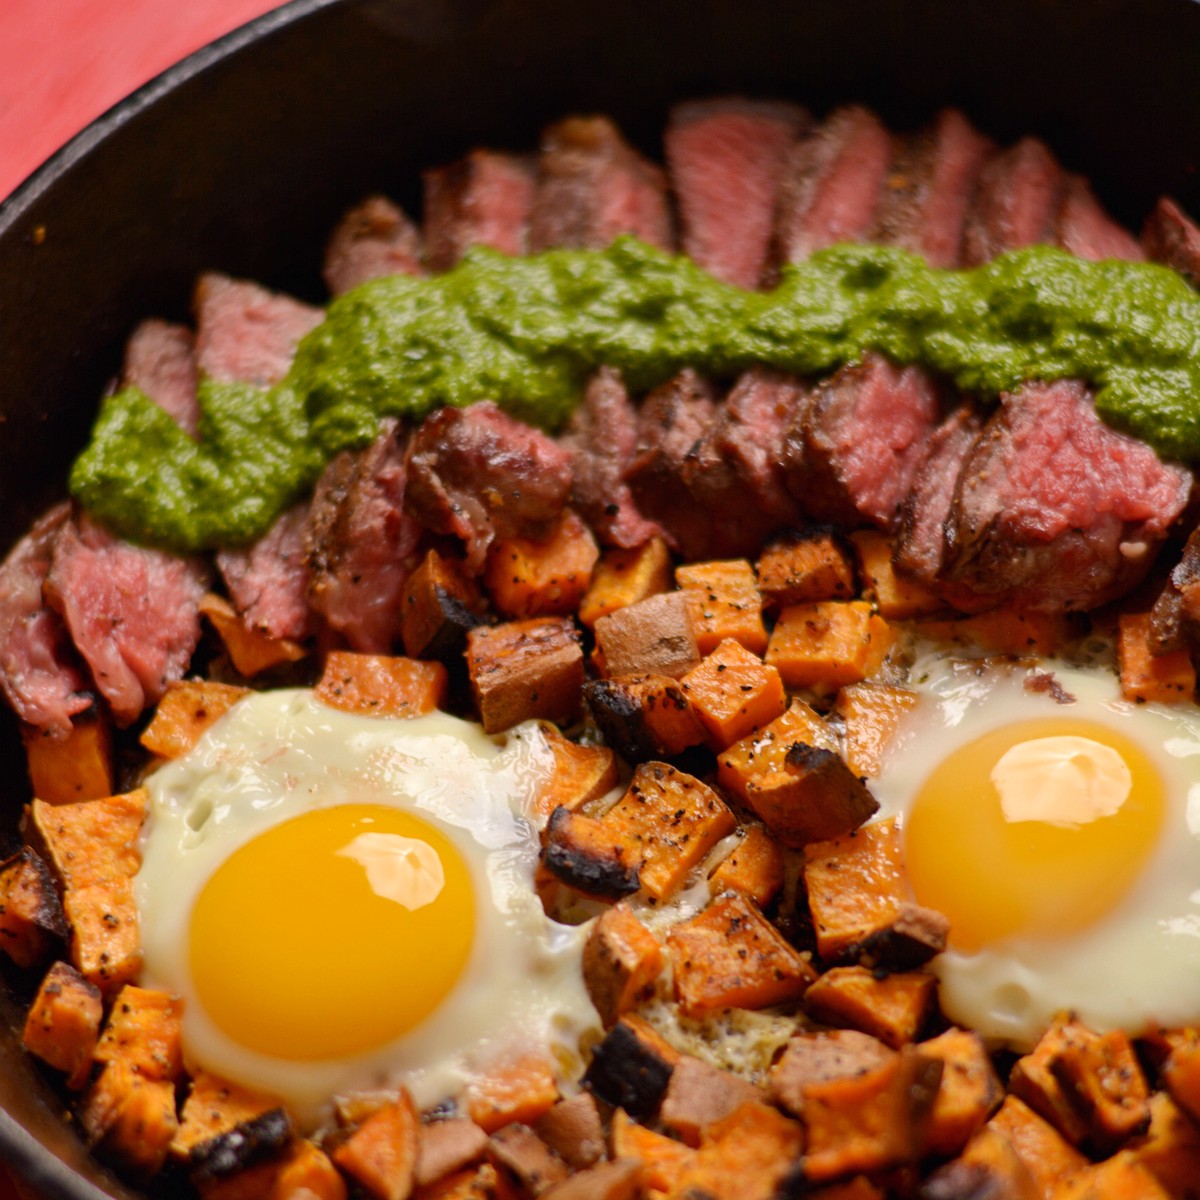 A skillet with steak, sweet potatoes, and eggs with a green sauce.